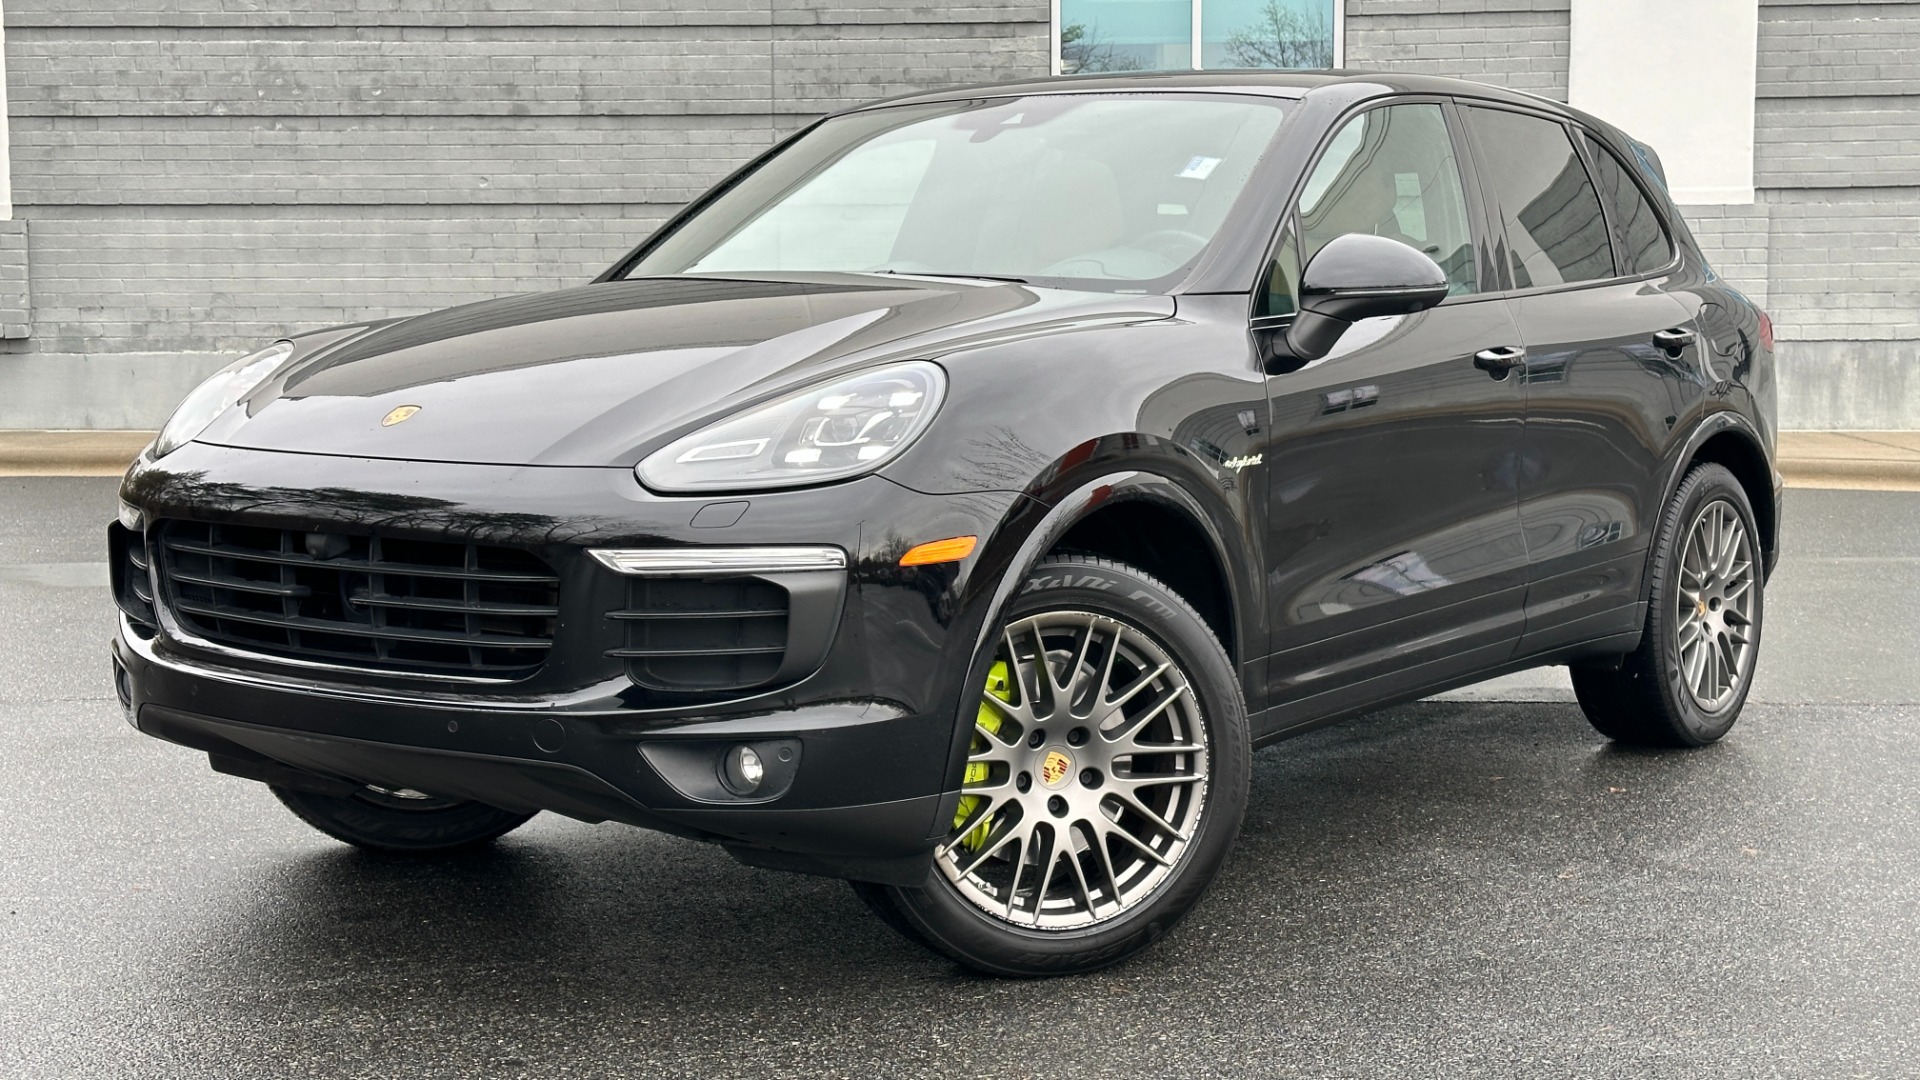 Used 2017 Porsche Cayenne S E-Hybrid PLATINUM / PREMIUM PLUS / SAFETY ASSIST for sale Sold at Formula Imports in Charlotte NC 28227 1